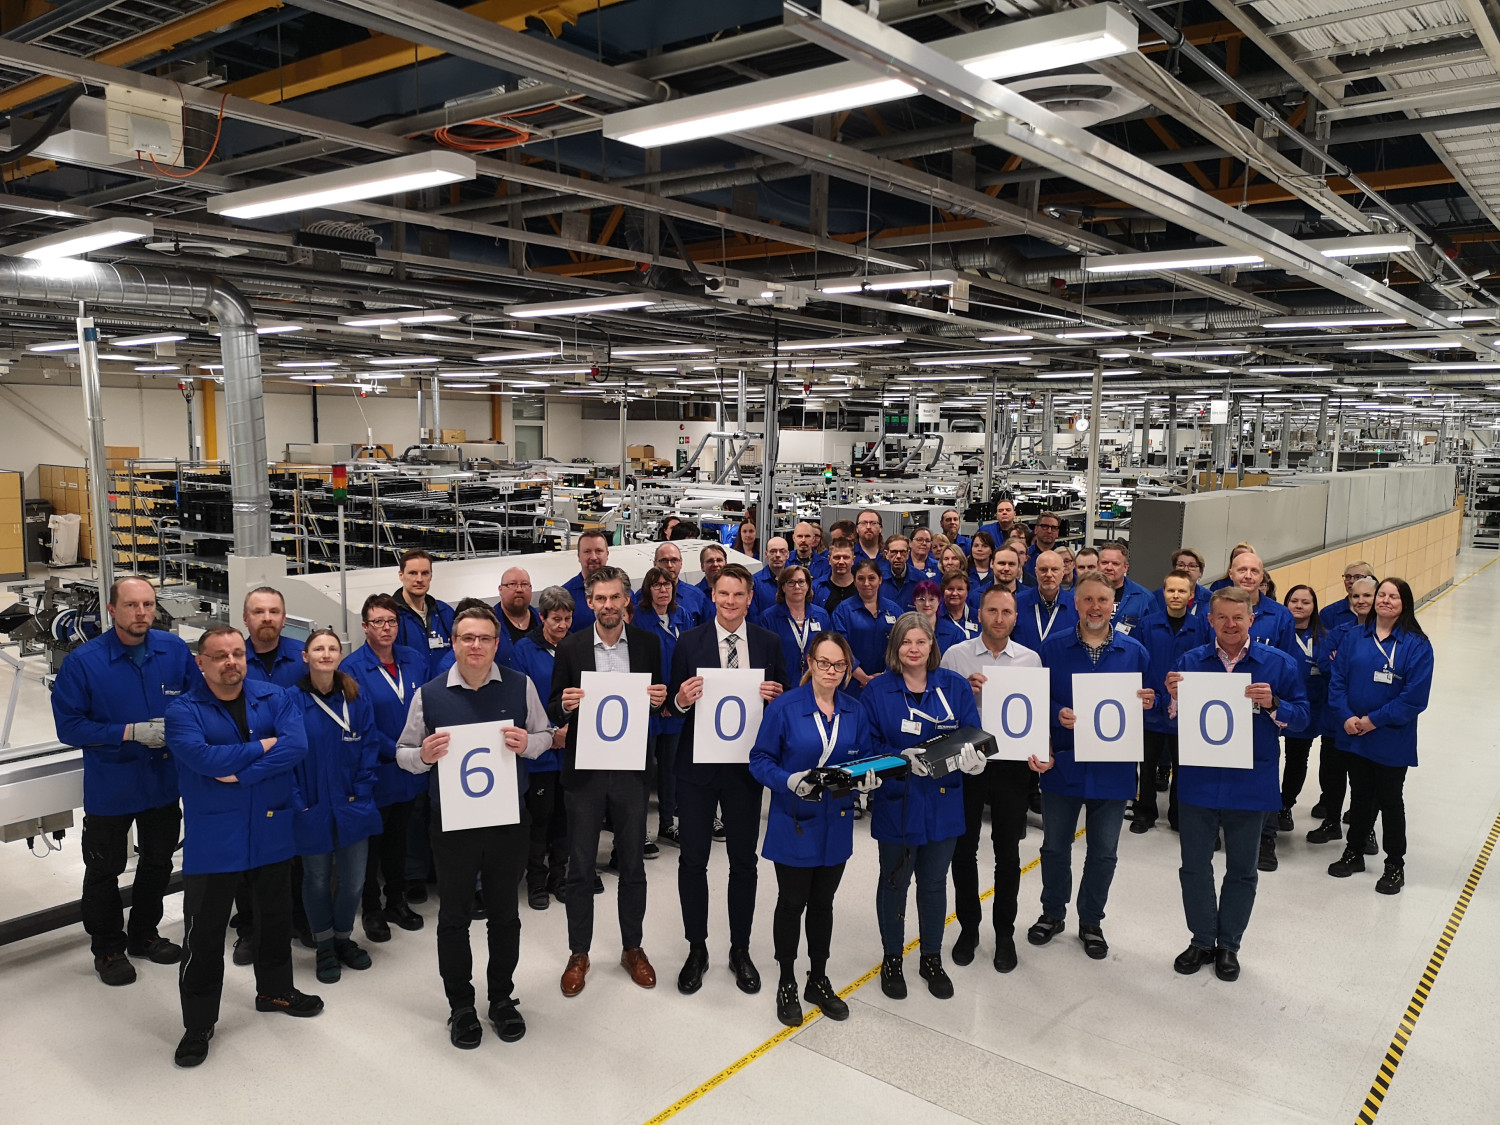 Employees at Micropower stand together in the factory and celebrate